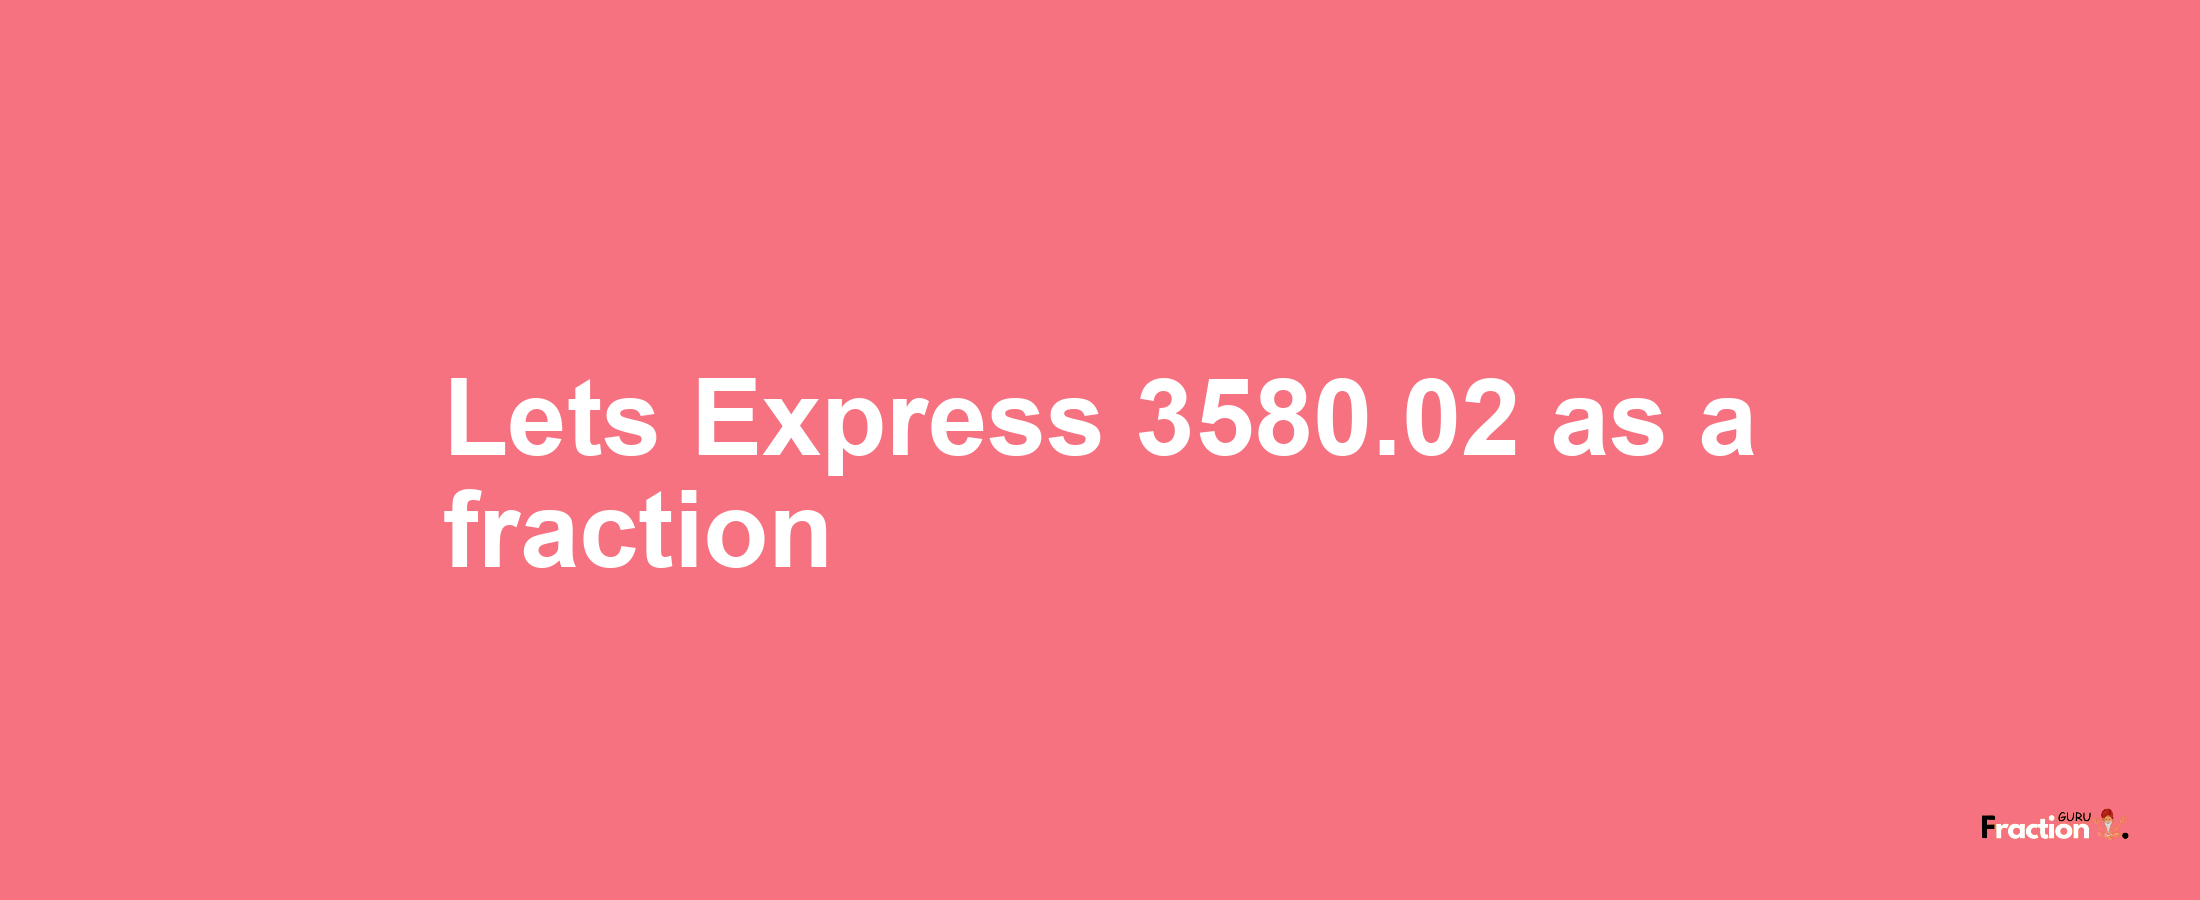 Lets Express 3580.02 as afraction